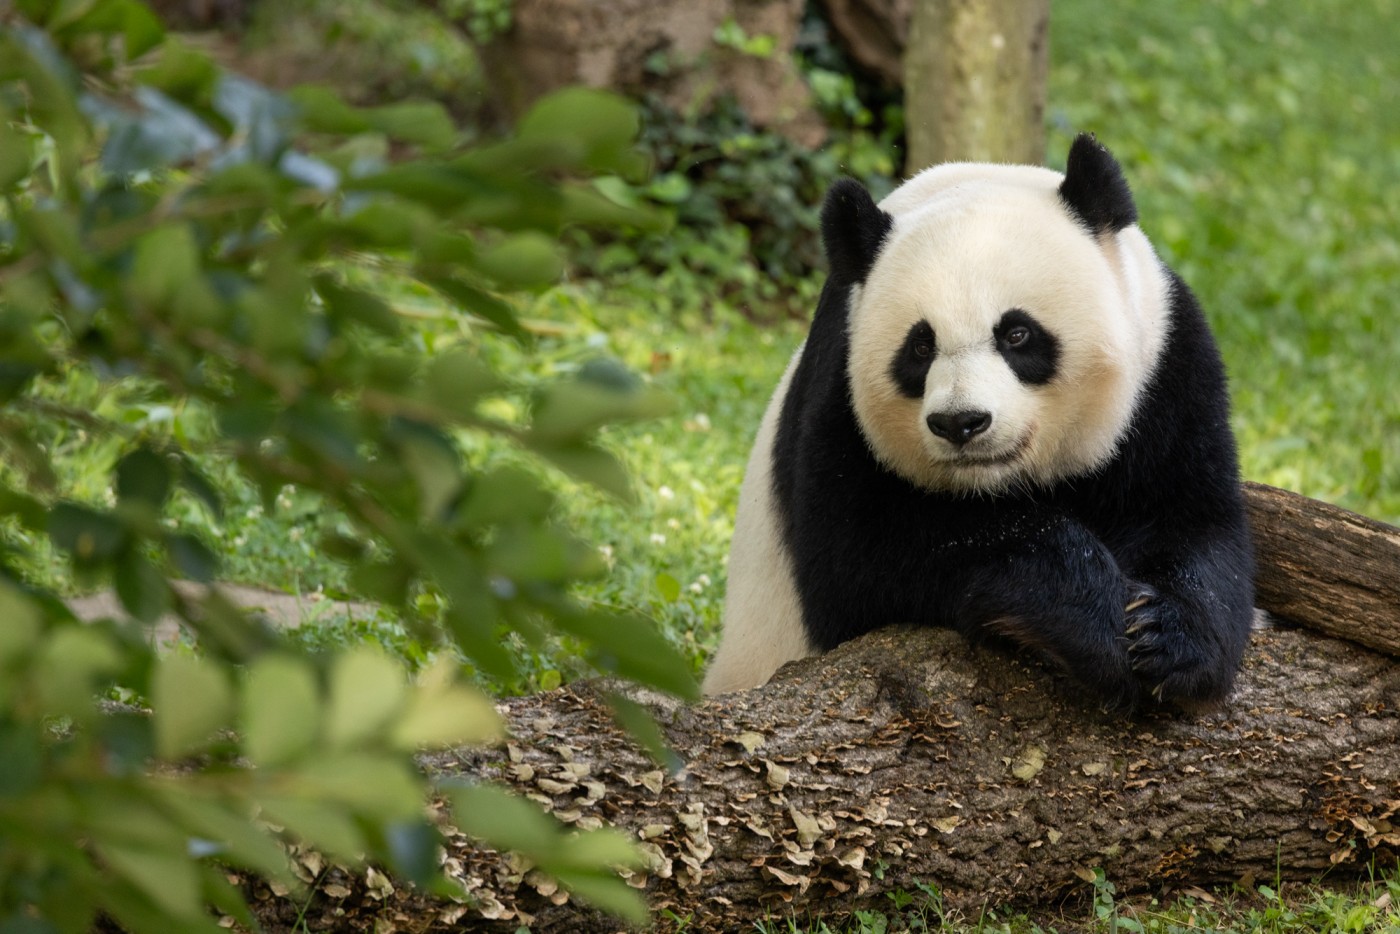 giant panda leaning over a log